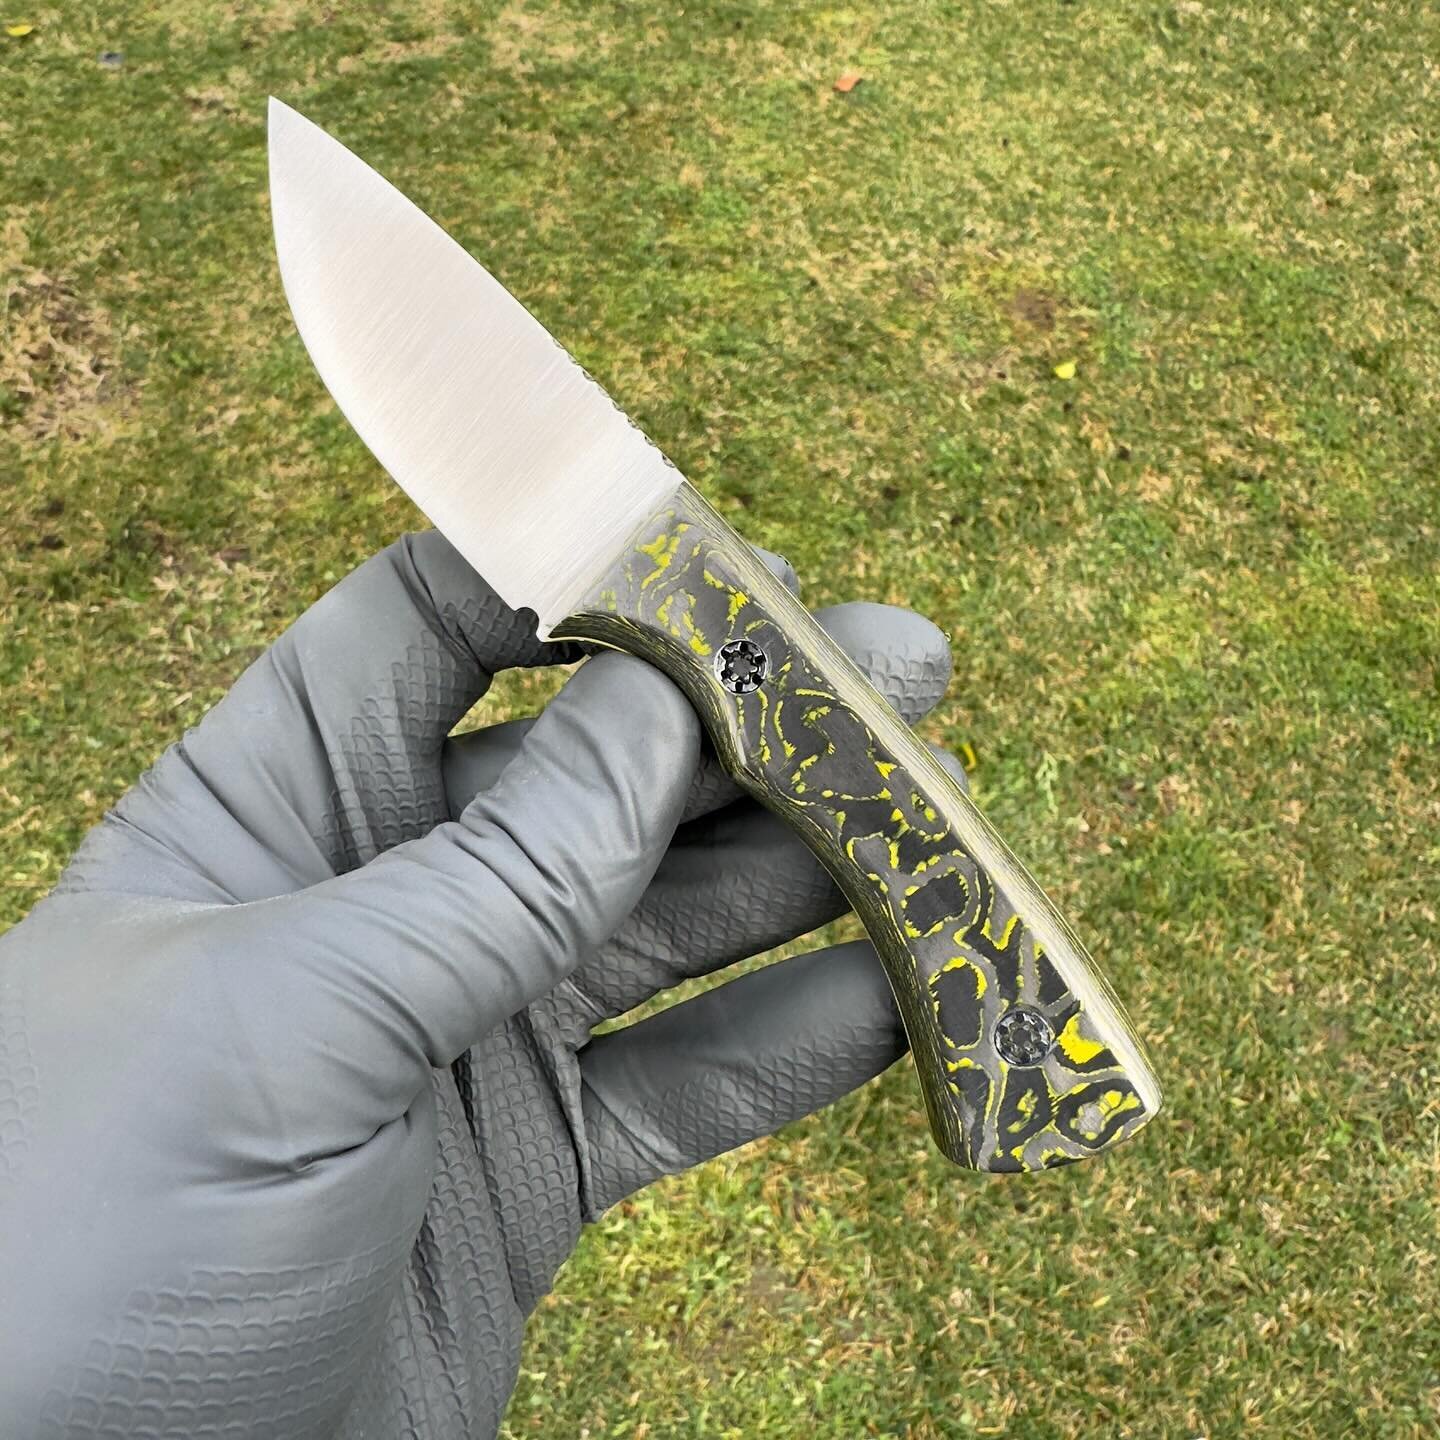 Brother w/ yellow carbon fiber - Great EDC sized fixed blade always there by your side!

Blade: MagnaCut
Handle: Yellow Carbon Fiber from @camocarbon w/ thin yellow liner and mosaic pins
*AVAILABLE*

#handmade #knife #knives #blade #blades #sinanblad